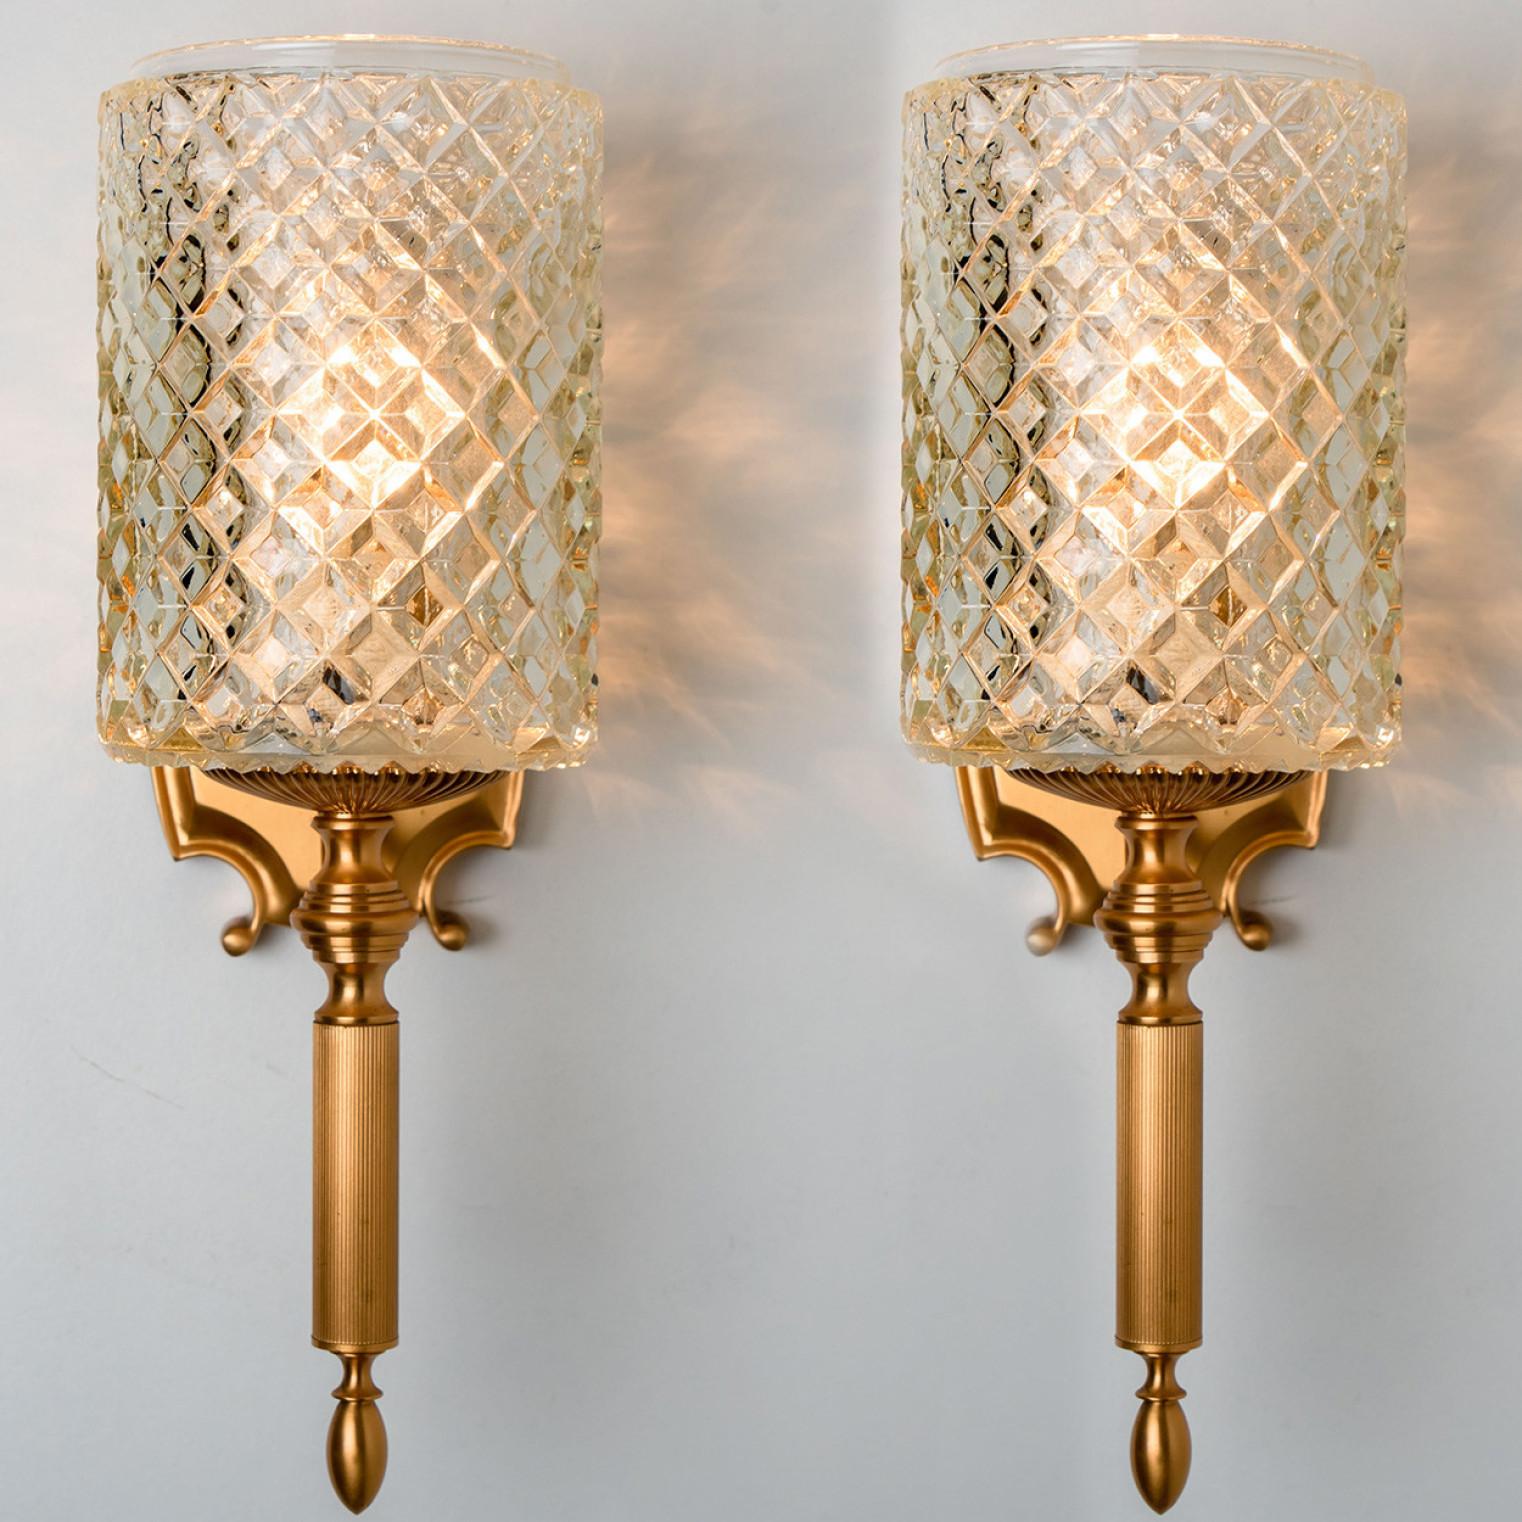 Textured Glass and Brass Wall Lights, Germany, 1960s For Sale 1